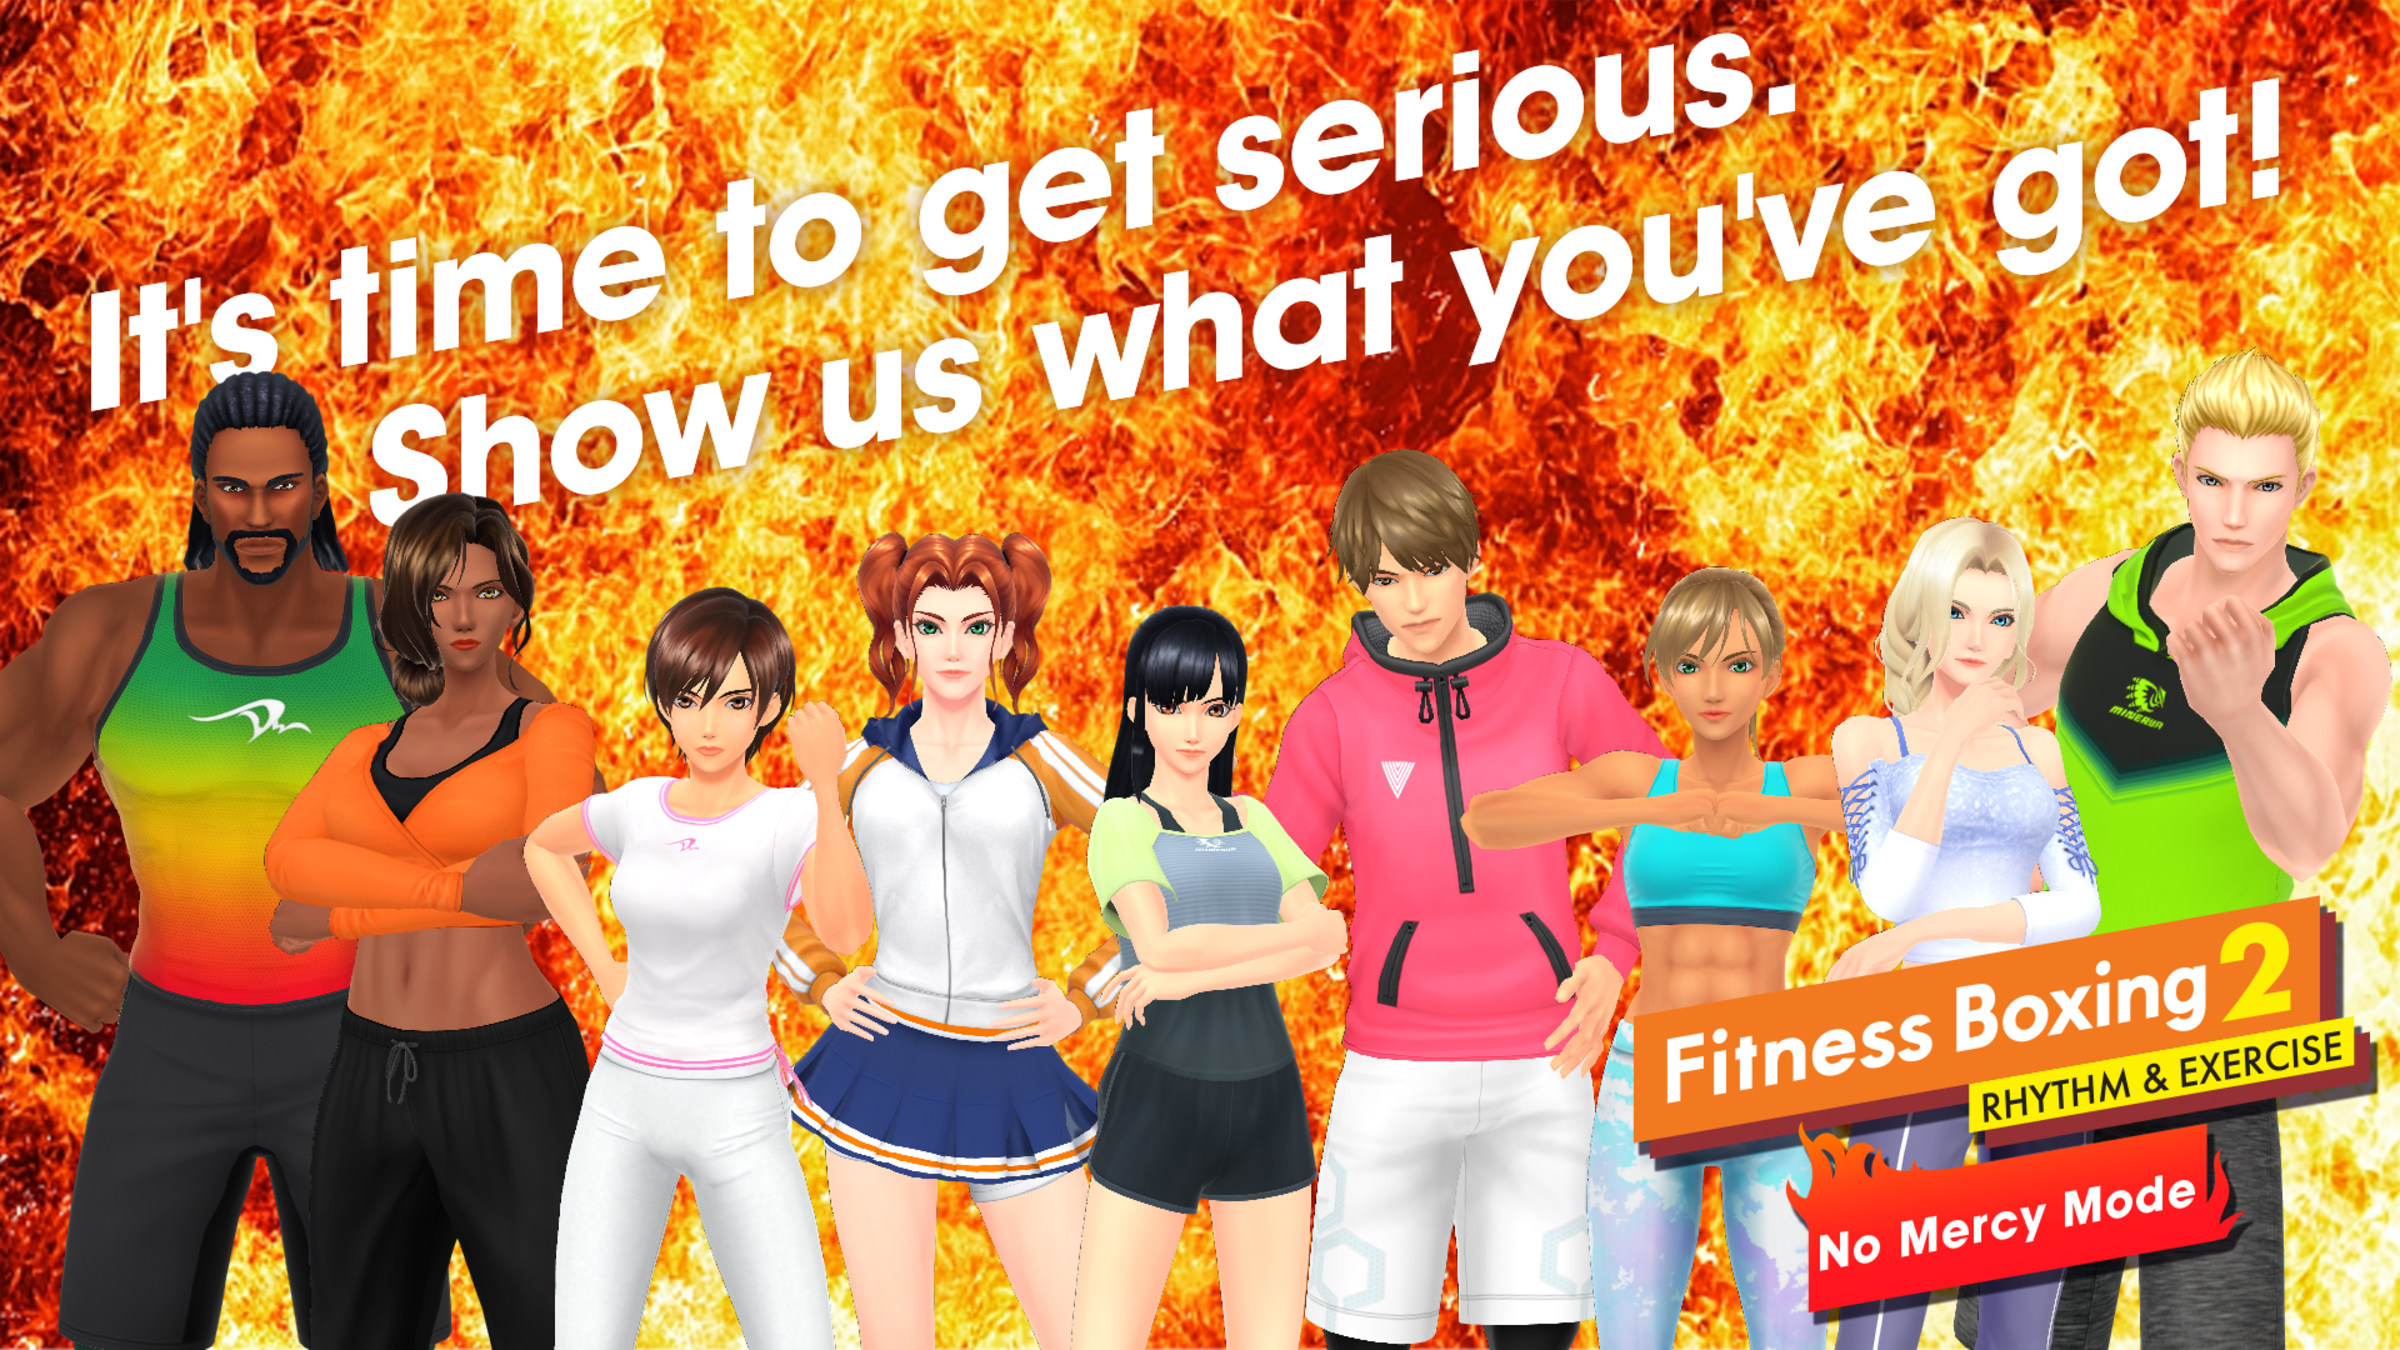 Fitness Boxing 2: Rhythm & - Exercise Site for Official No All Switch instructors Nintendo intensity: Mercy Nintendo